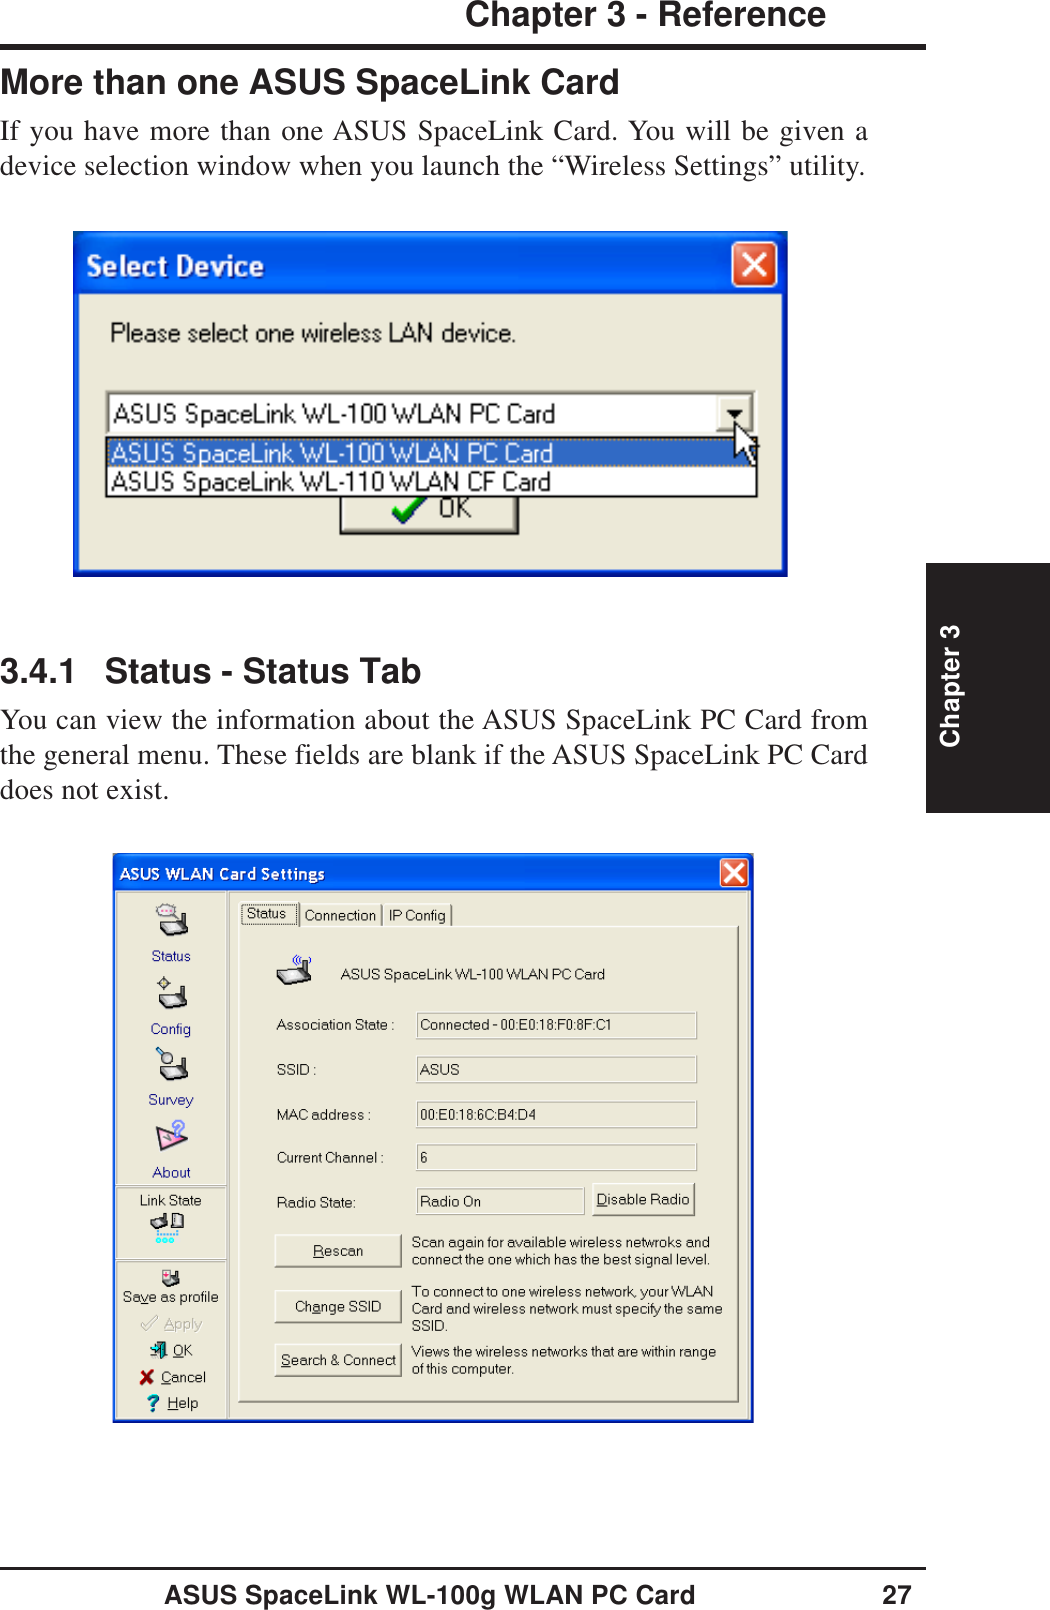 ASUS SpaceLink WL-100g WLAN PC Card 27Chapter 3 - ReferenceChapter 33.4.1 Status - Status TabYou can view the information about the ASUS SpaceLink PC Card fromthe general menu. These fields are blank if the ASUS SpaceLink PC Carddoes not exist.More than one ASUS SpaceLink CardIf you have more than one ASUS SpaceLink Card. You will be given adevice selection window when you launch the “Wireless Settings” utility.